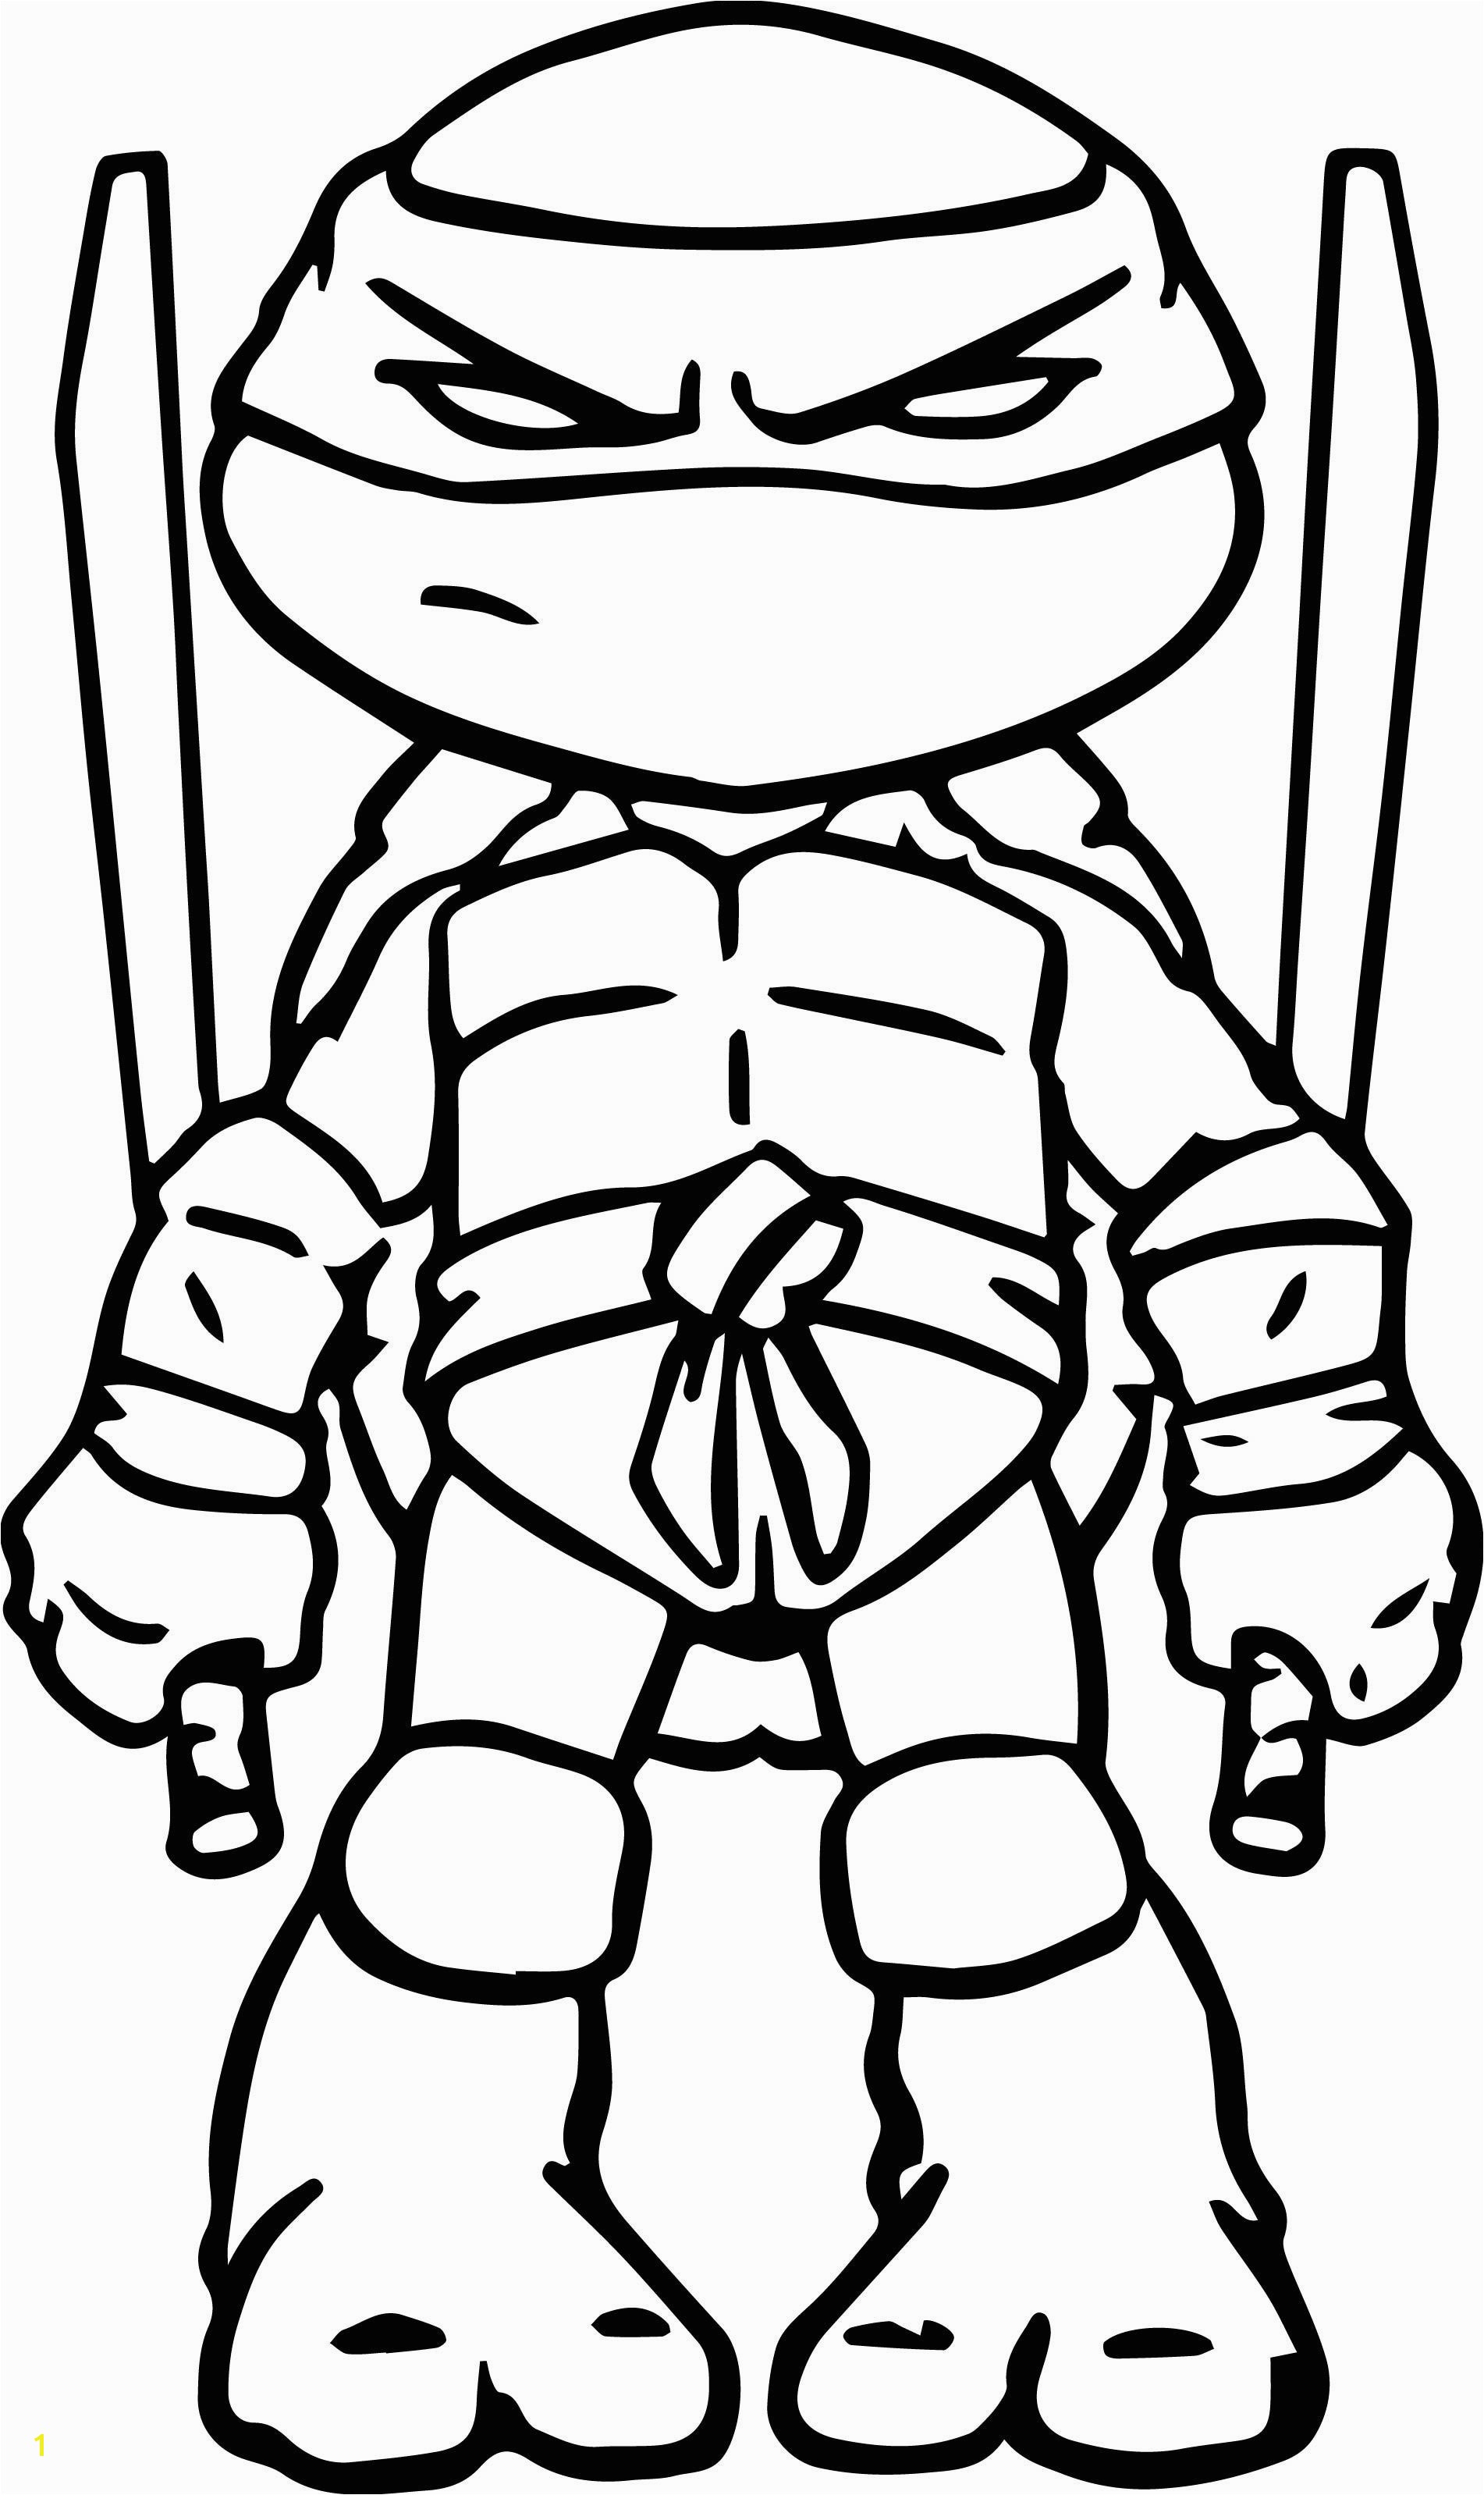 Free Ninja Turtle Coloring Pages Turtle Coloring Pages Tmnt Coloring Books Unique Teenage Mutant